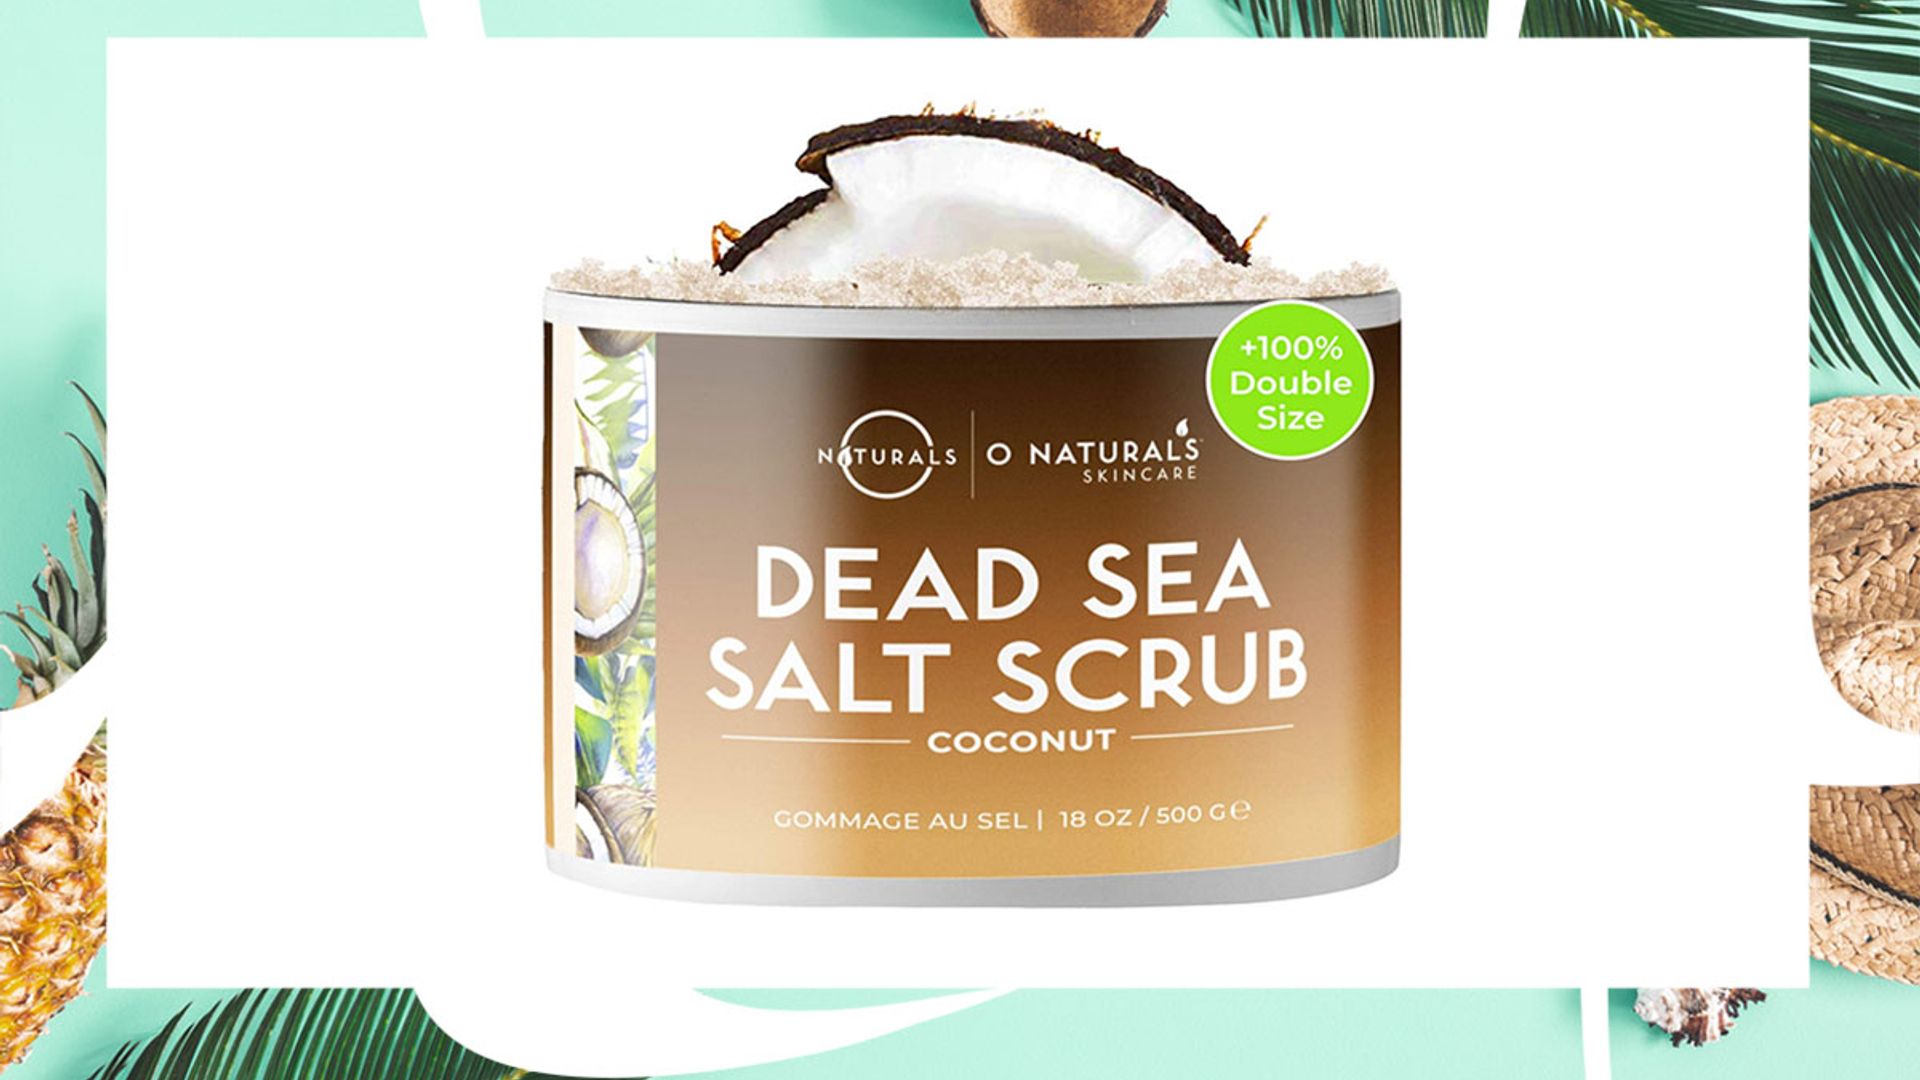 This coconut-smelling body scrub has glowing five-star reviews on Amazon